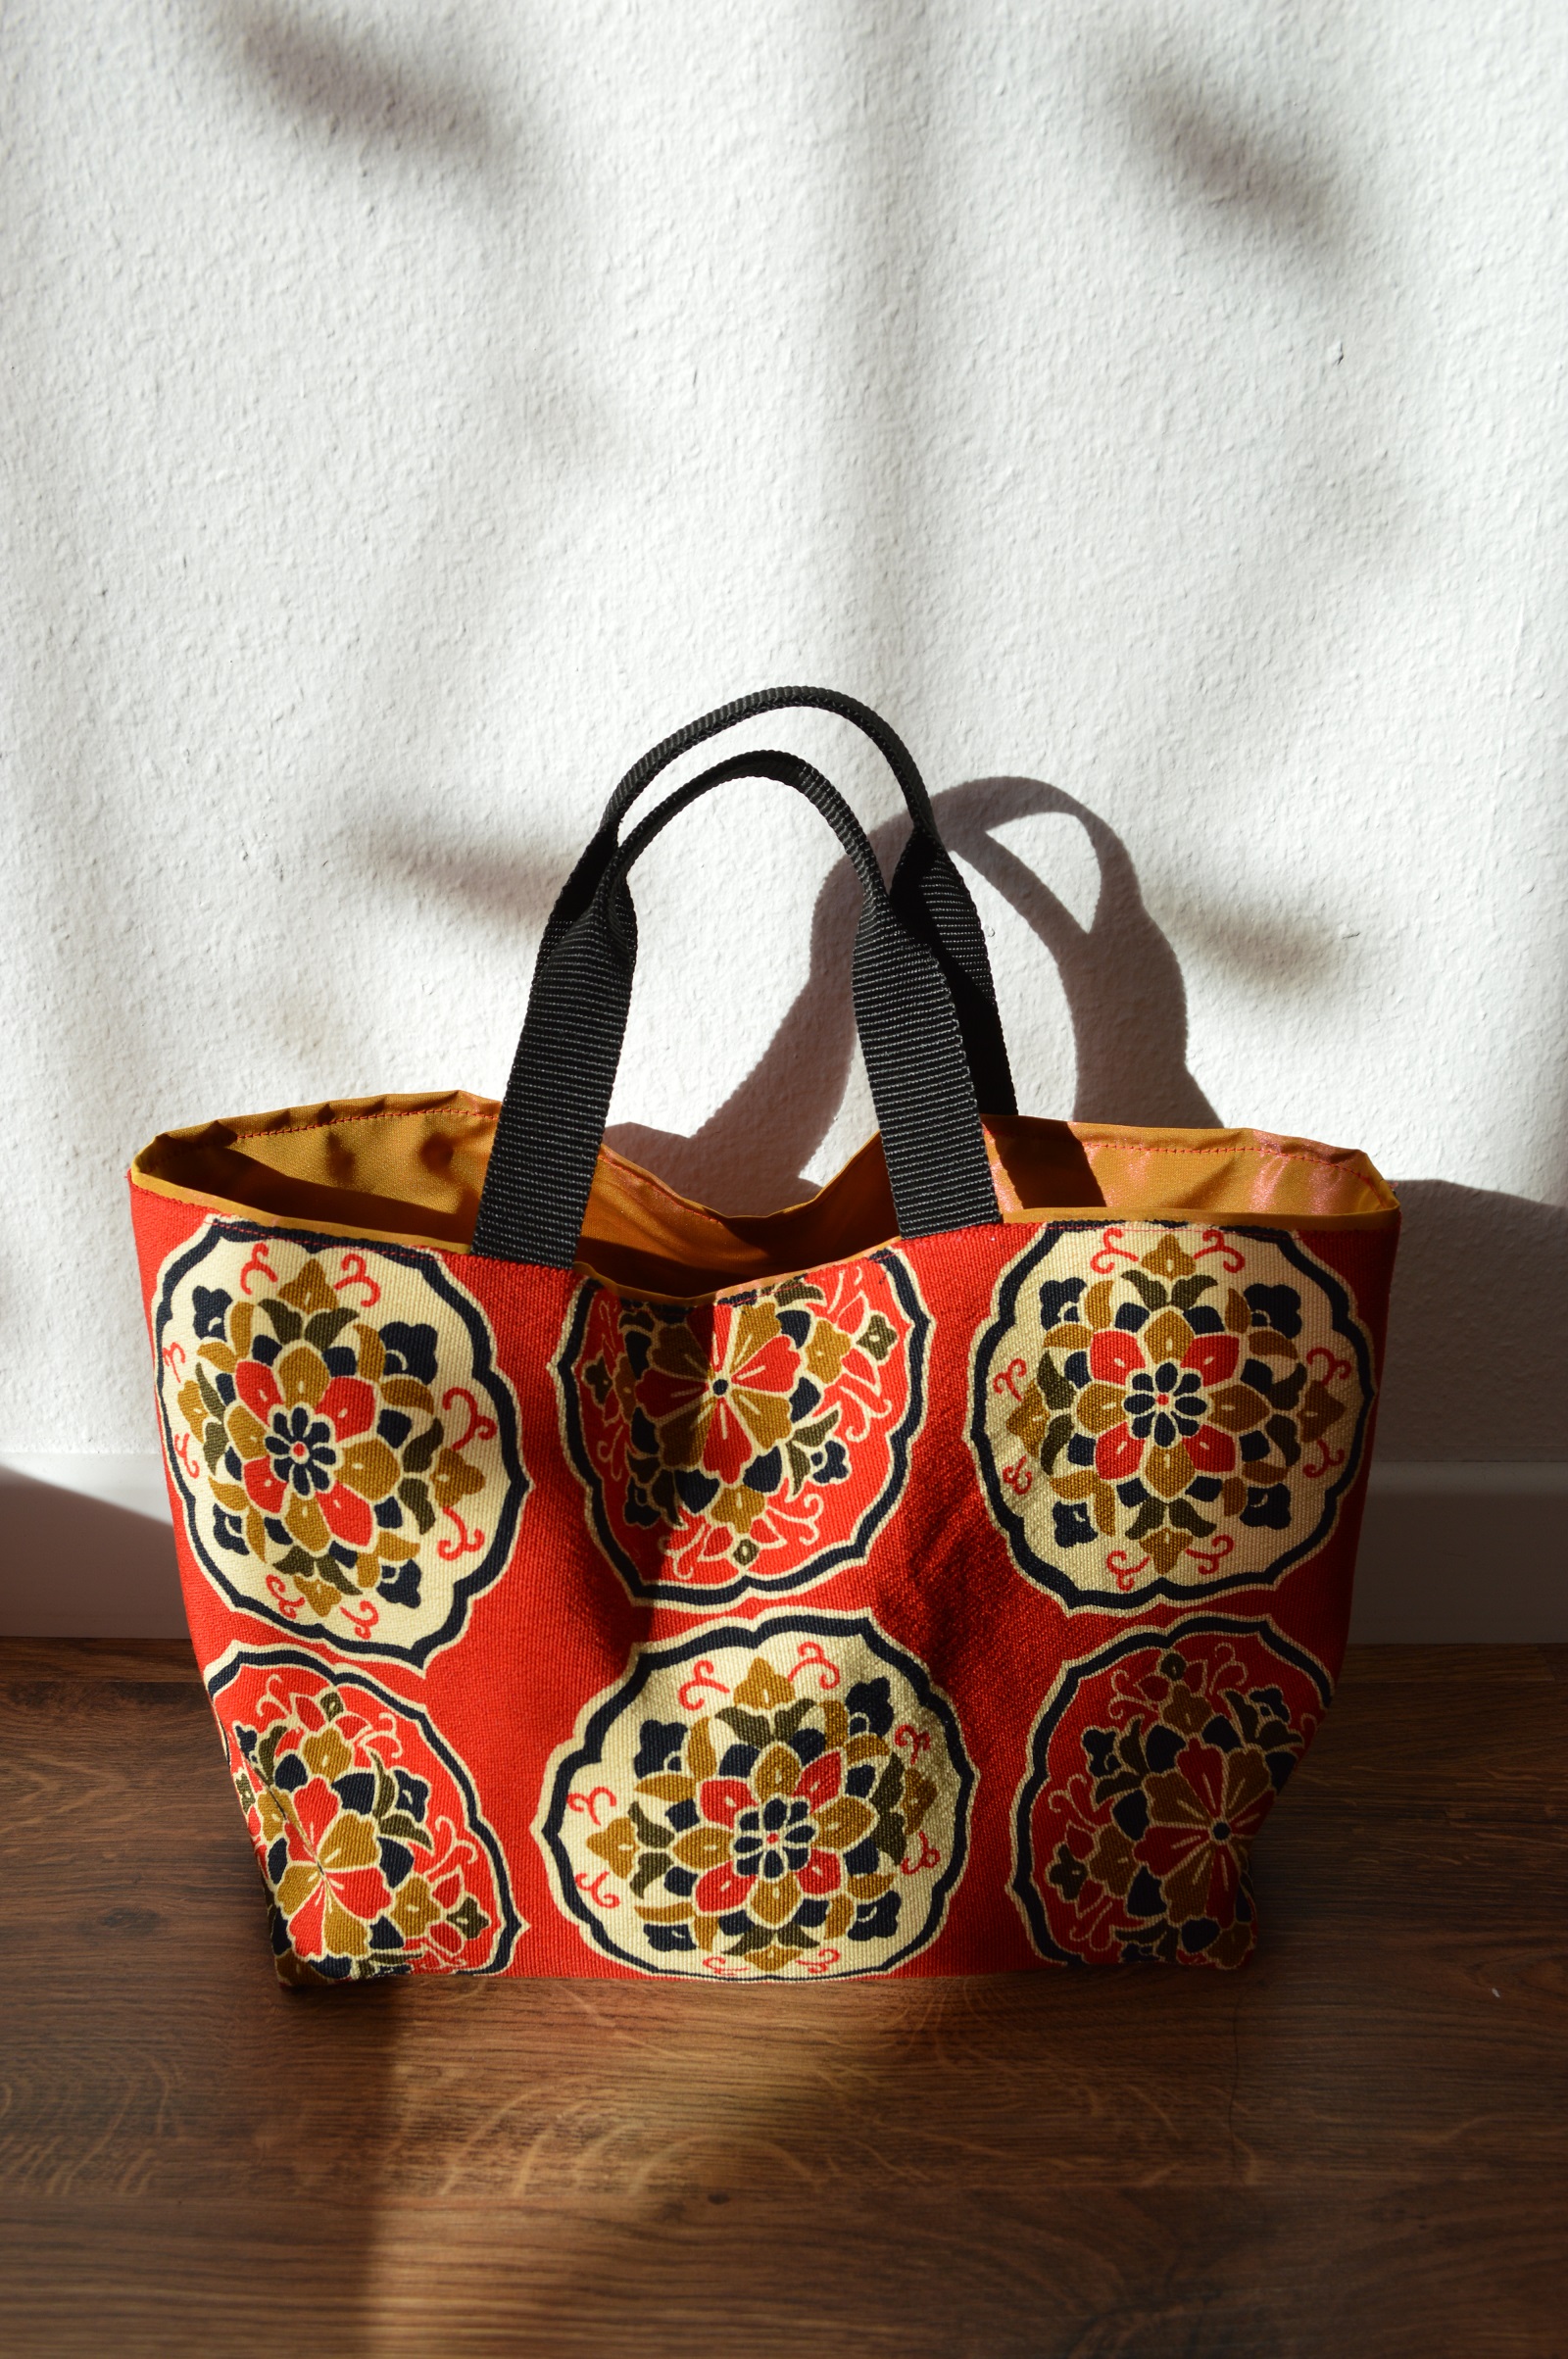 Tote bag made of Antique Obi – Sewing Projects | BurdaStyle.com